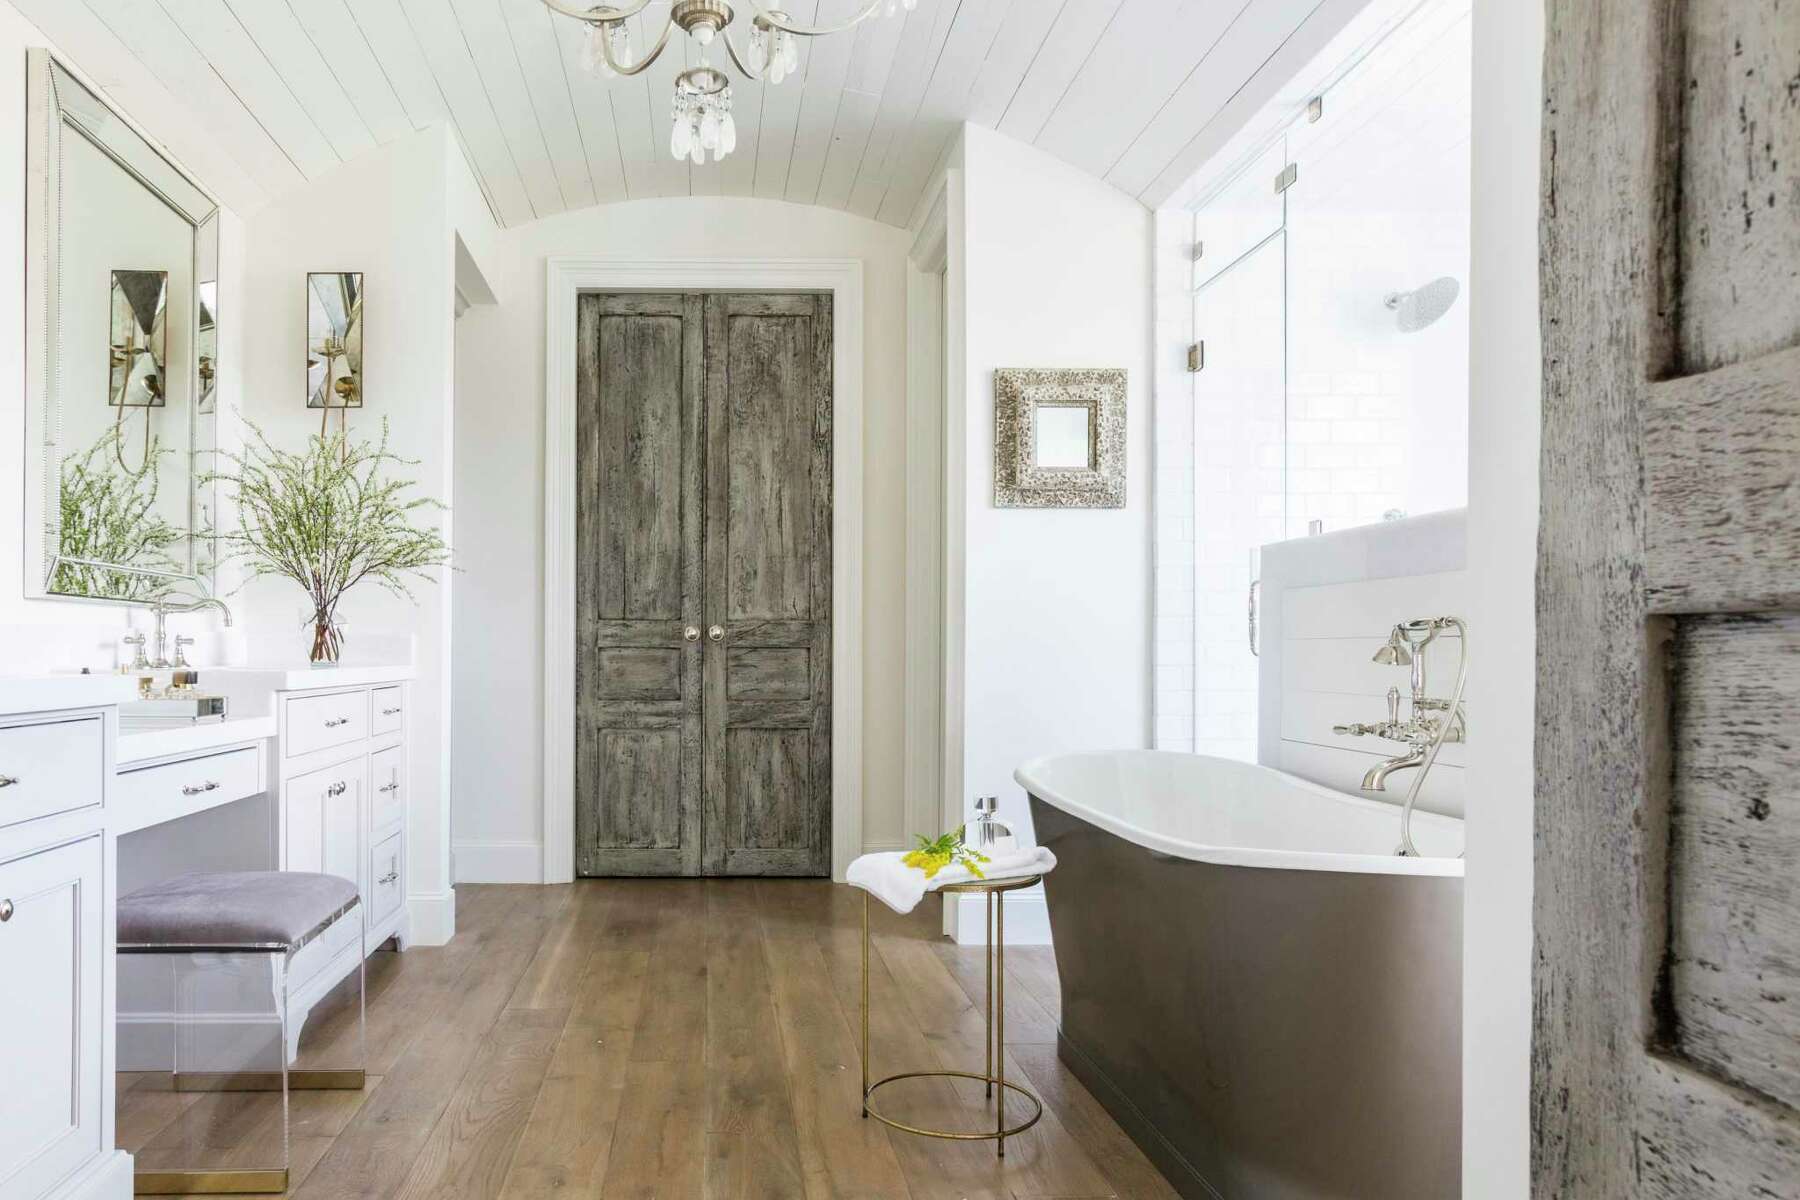 Rustic Bathroom Decor Ideas Pictures Amp Tips From Hgtv Hgtv